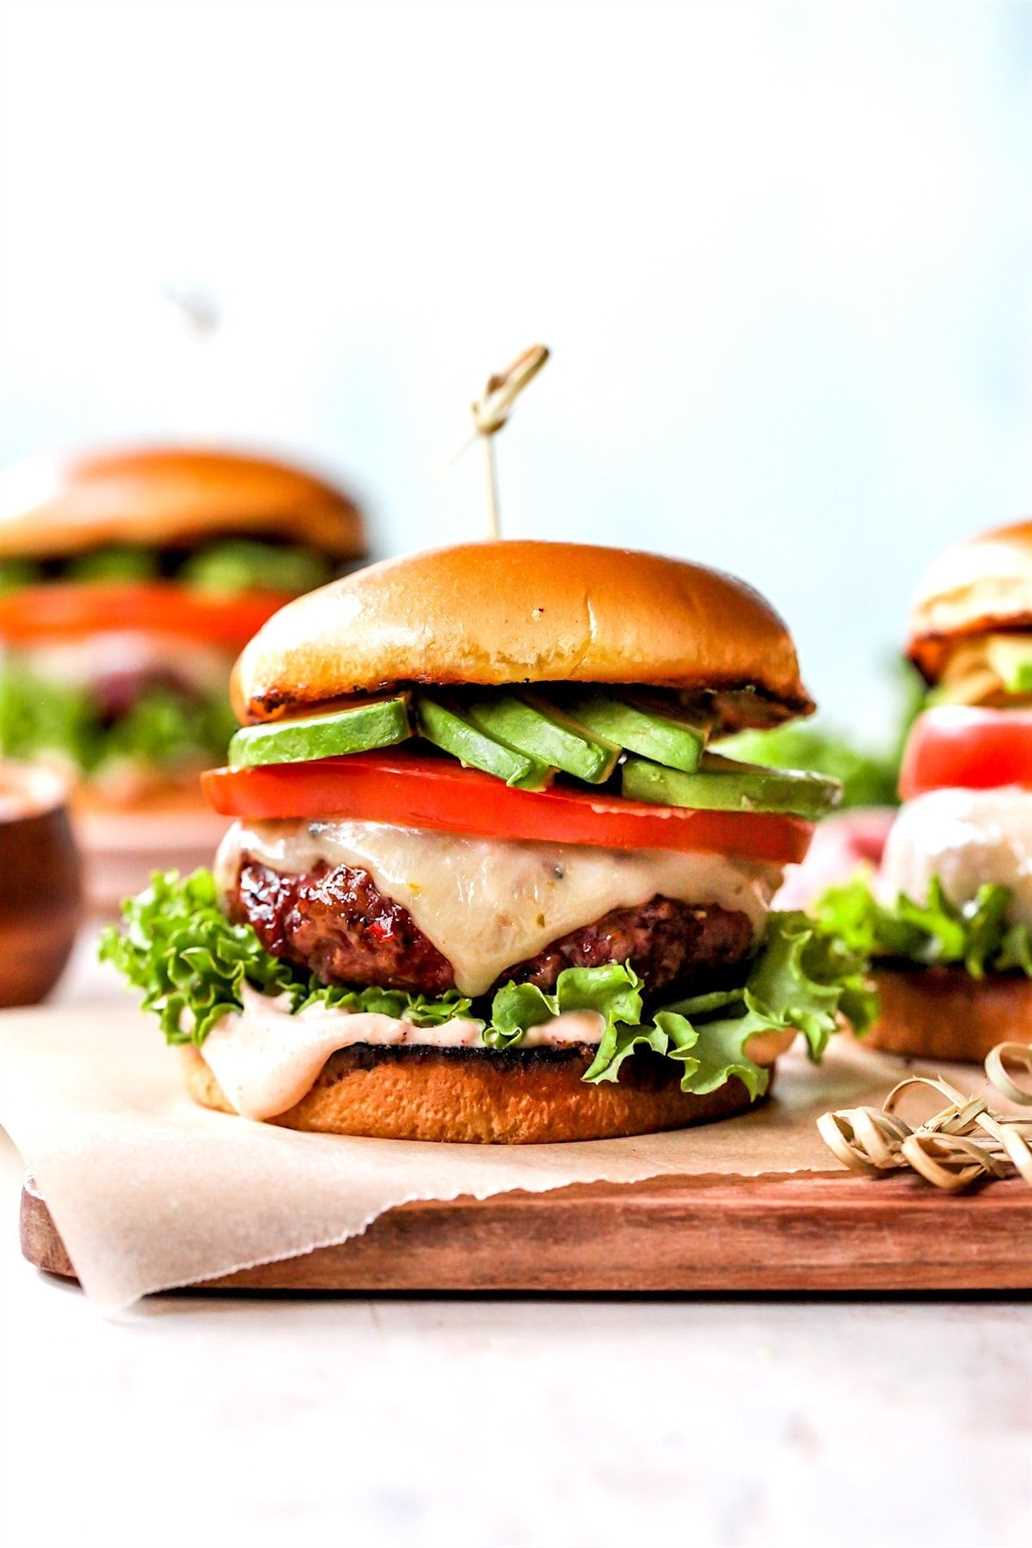 Chipotle Burgers with cheese, avocado, tomato, and lettuce